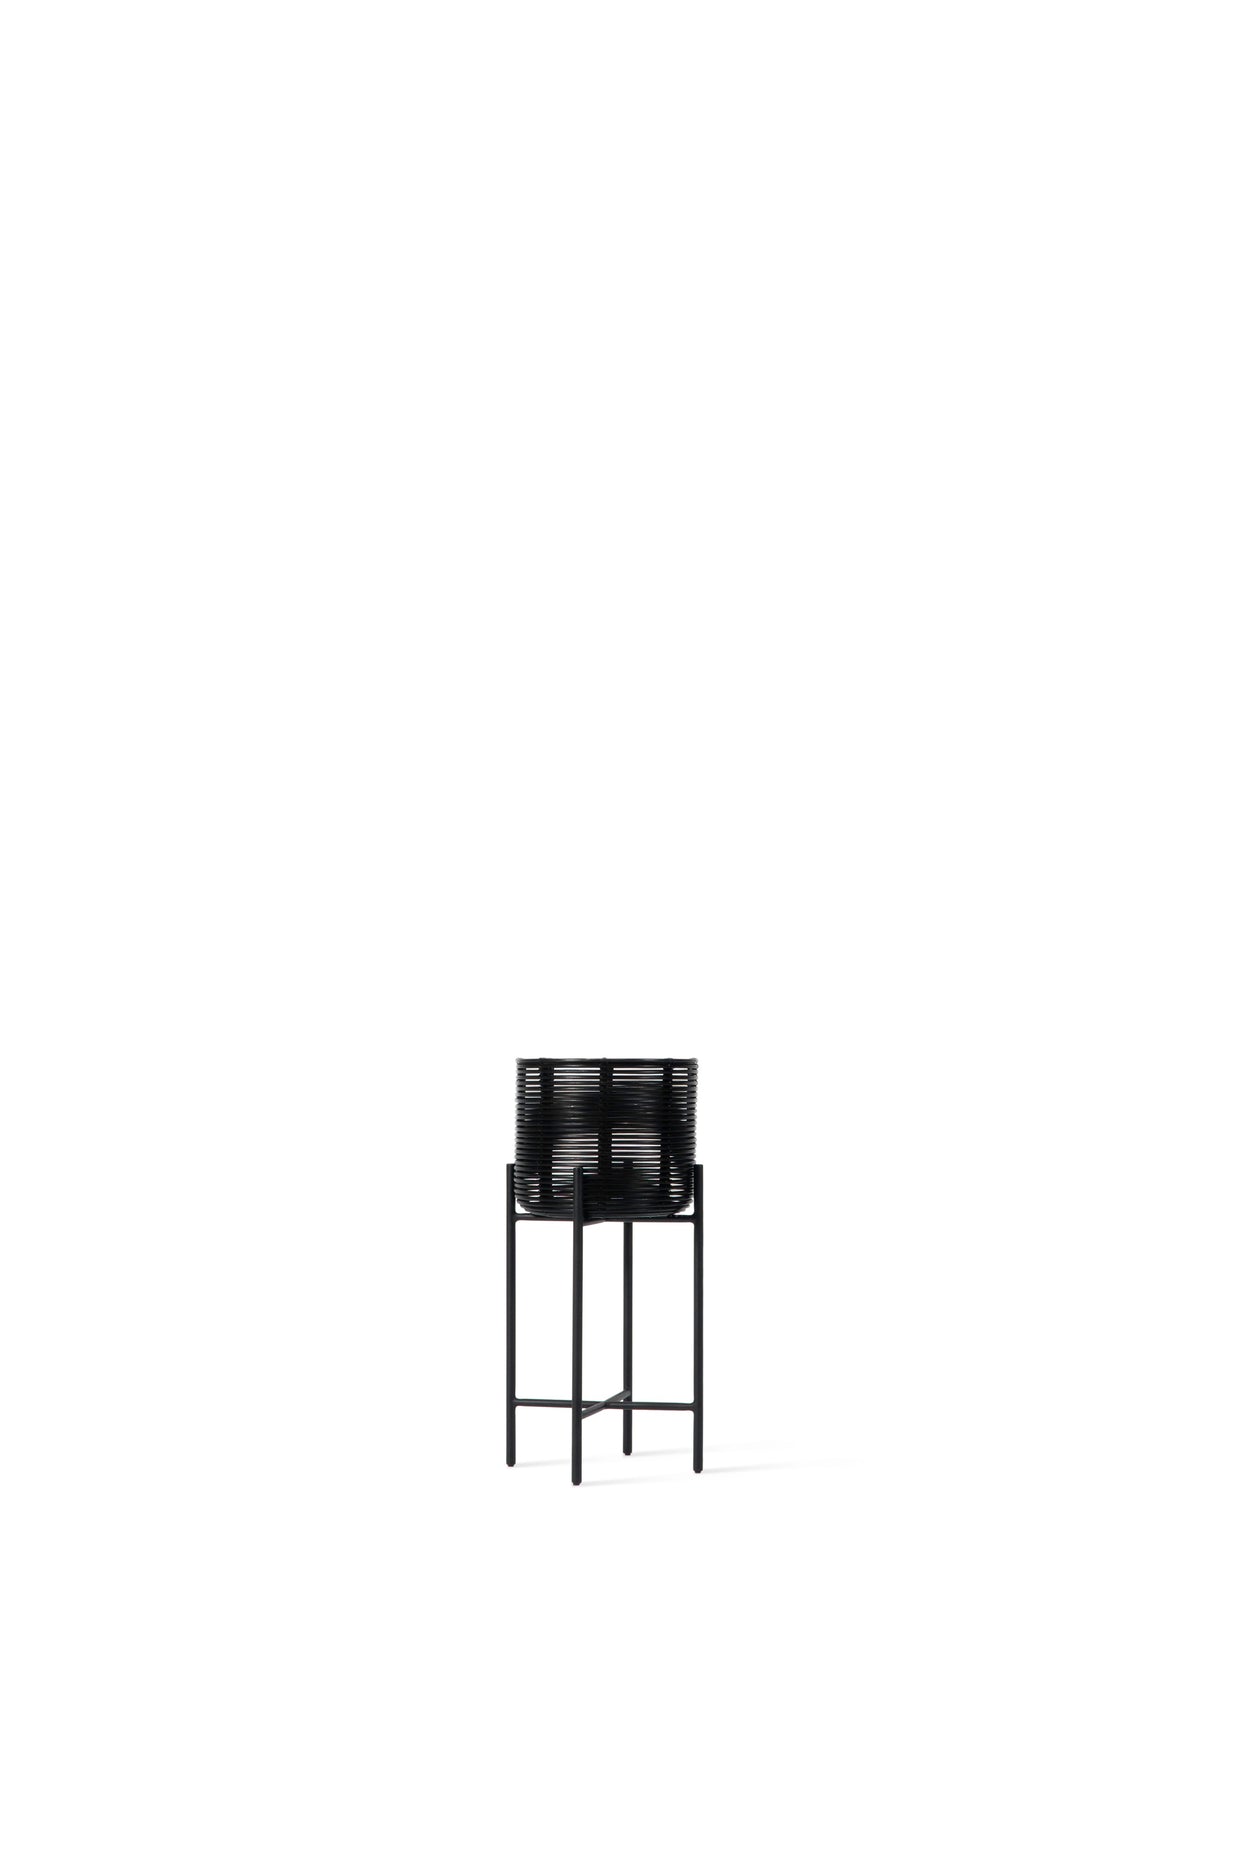 Ivo Plant Stand - 3 sizes